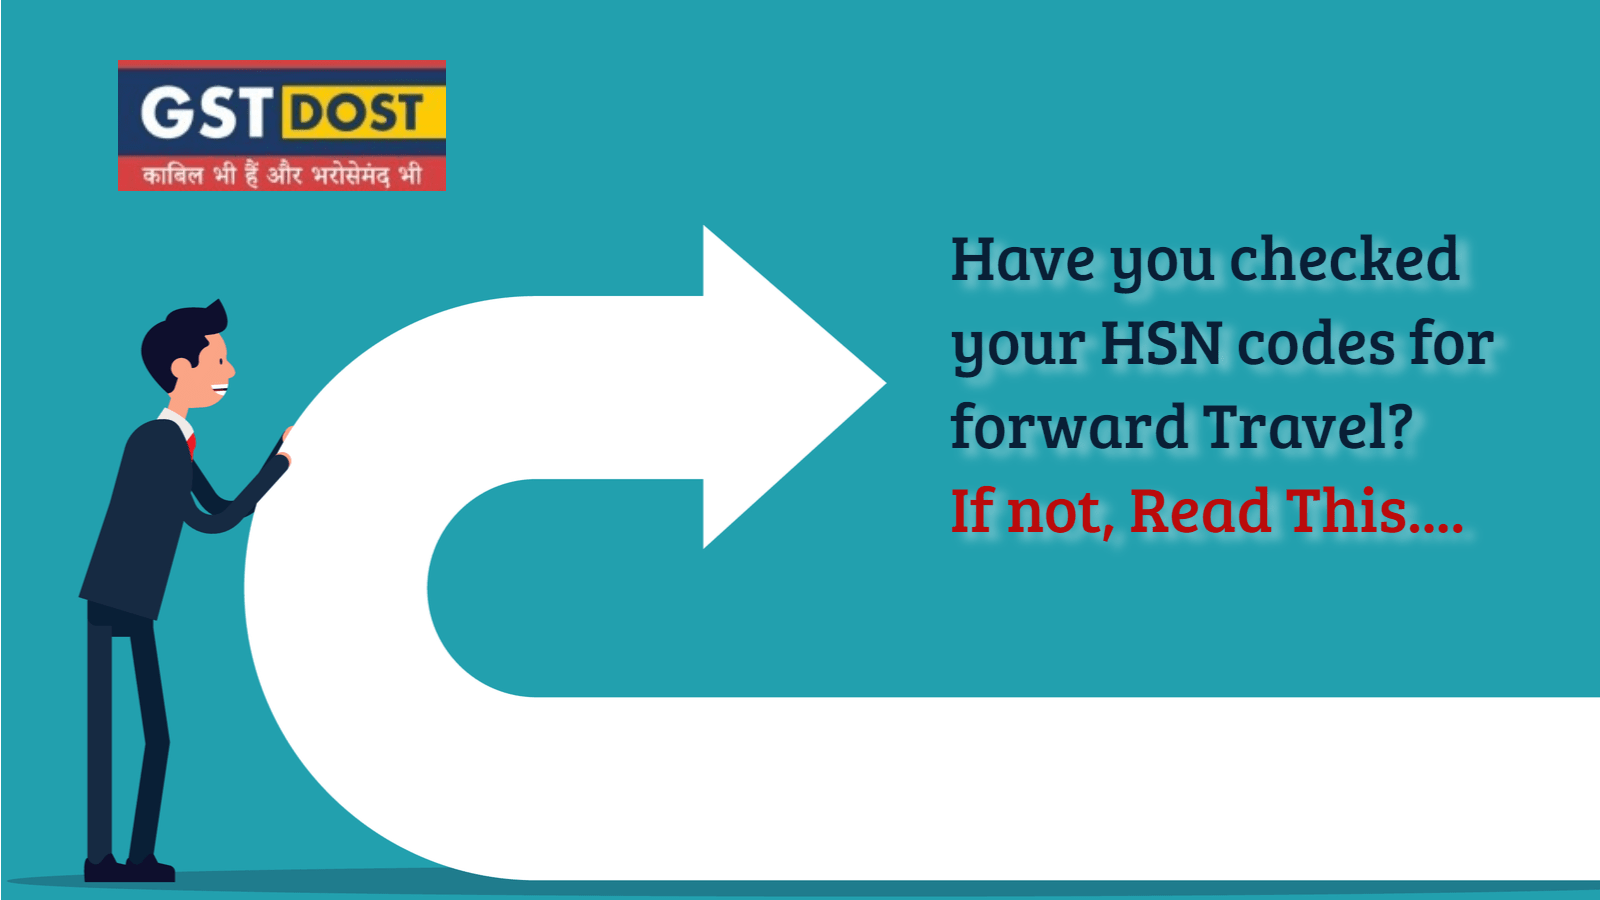 Have you checked your HSN codes for forward Travel? If not, Read This....